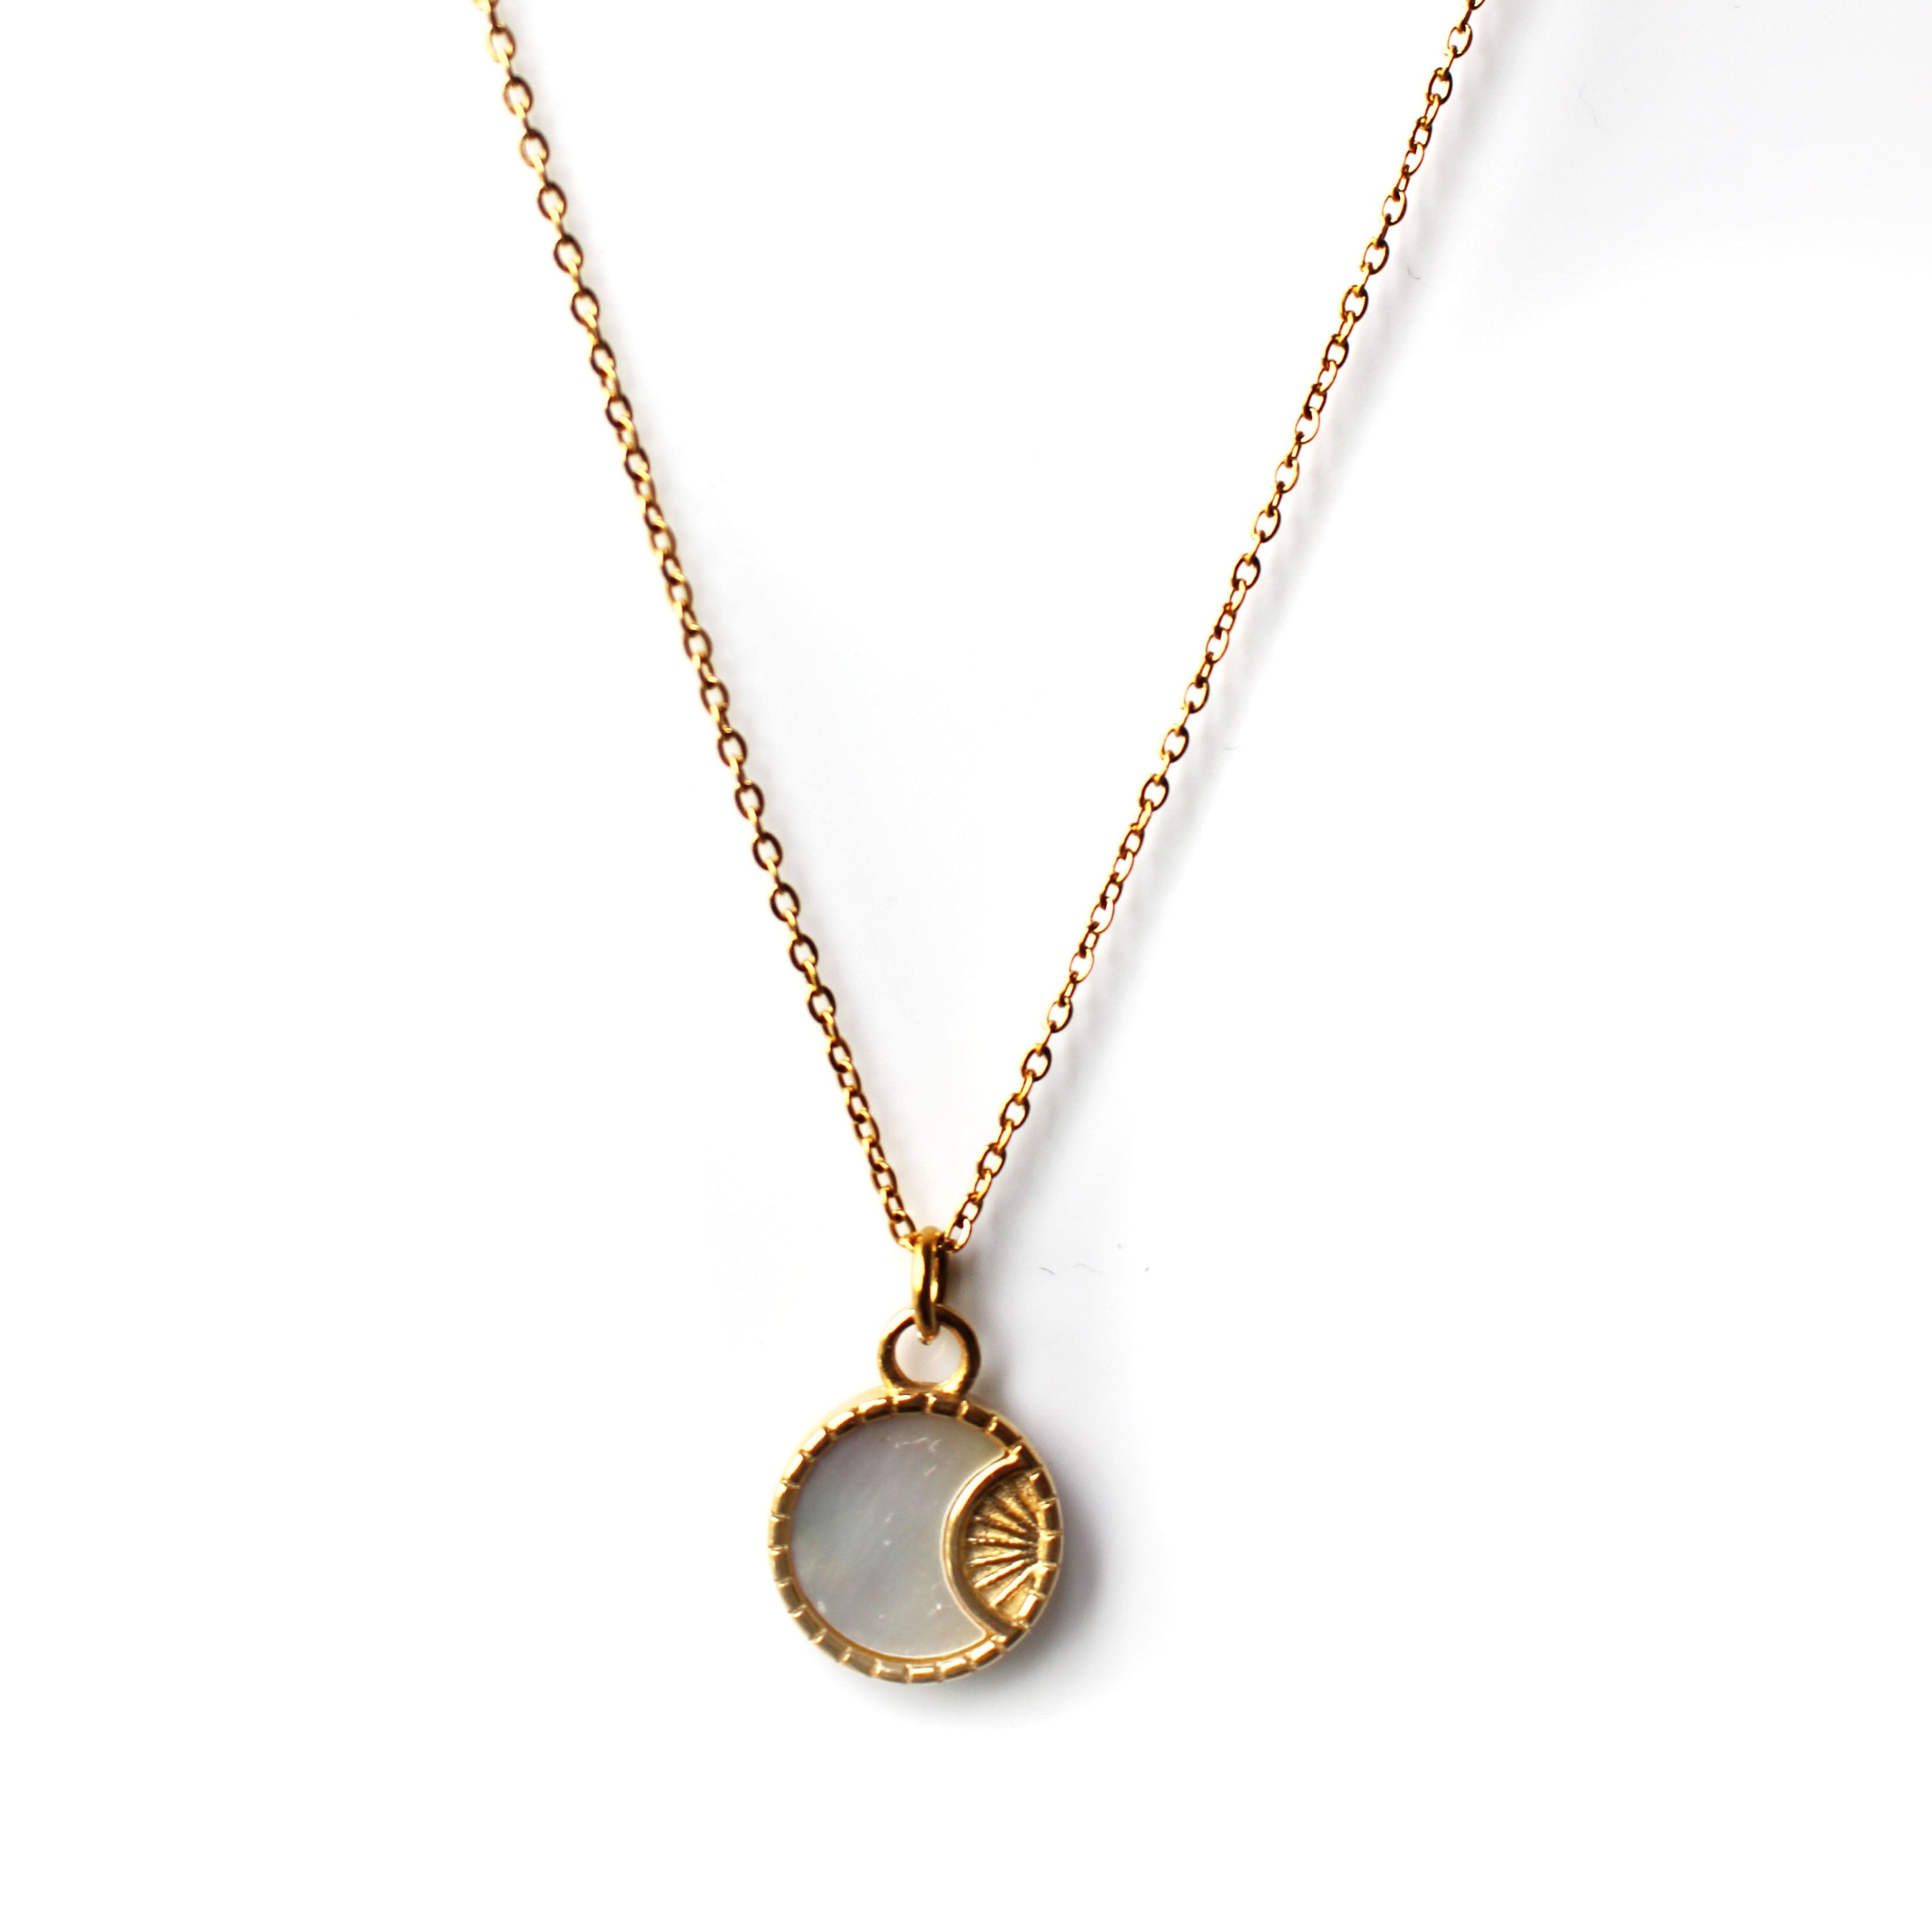 Neva Luxe 18k Gold Plated Pendant Necklace